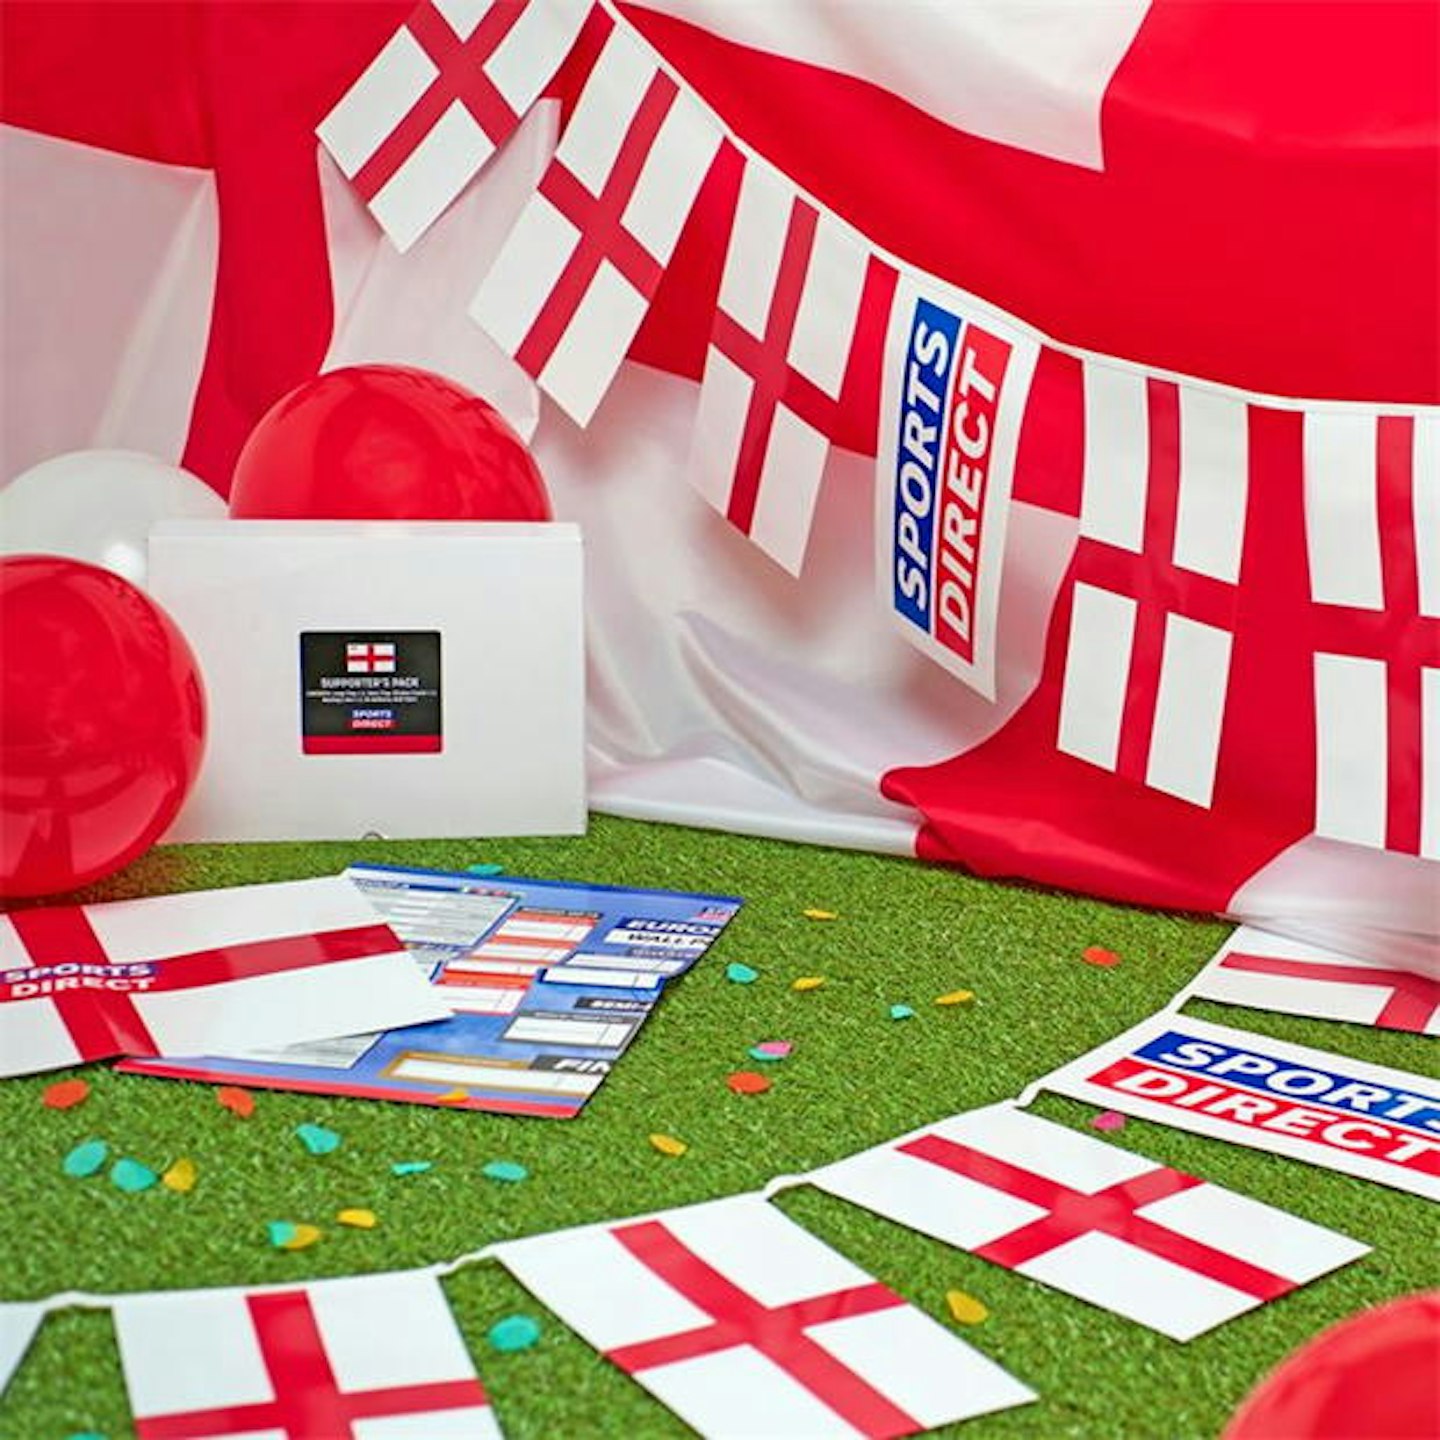 Team England Football Supporters Pack